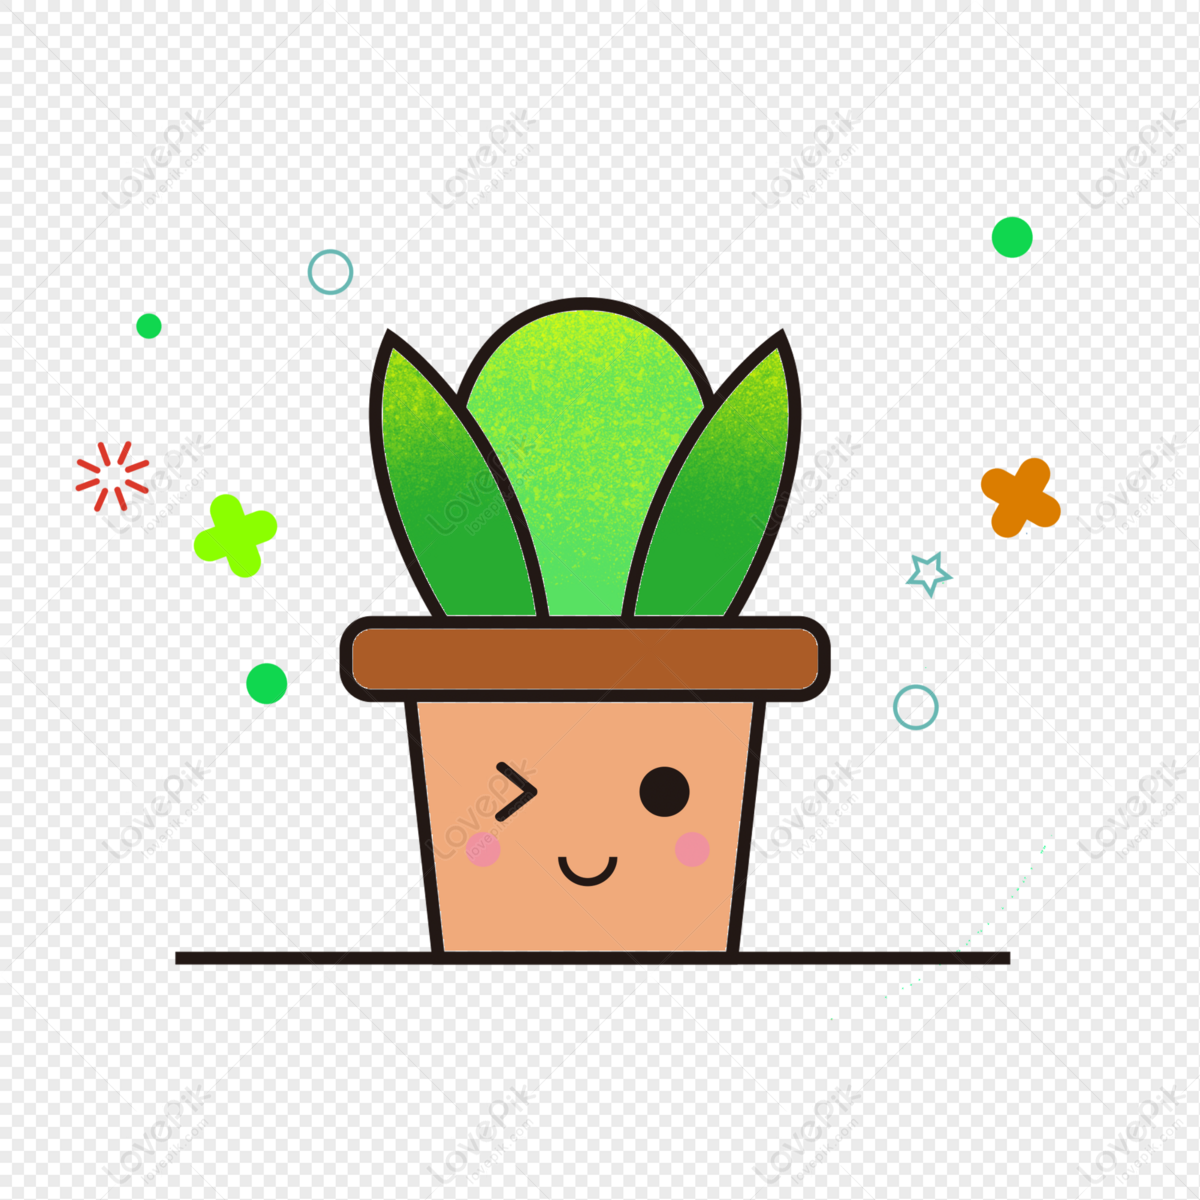 Cute Cactus PNG Hd Transparent Image And Clipart Image For Free ...